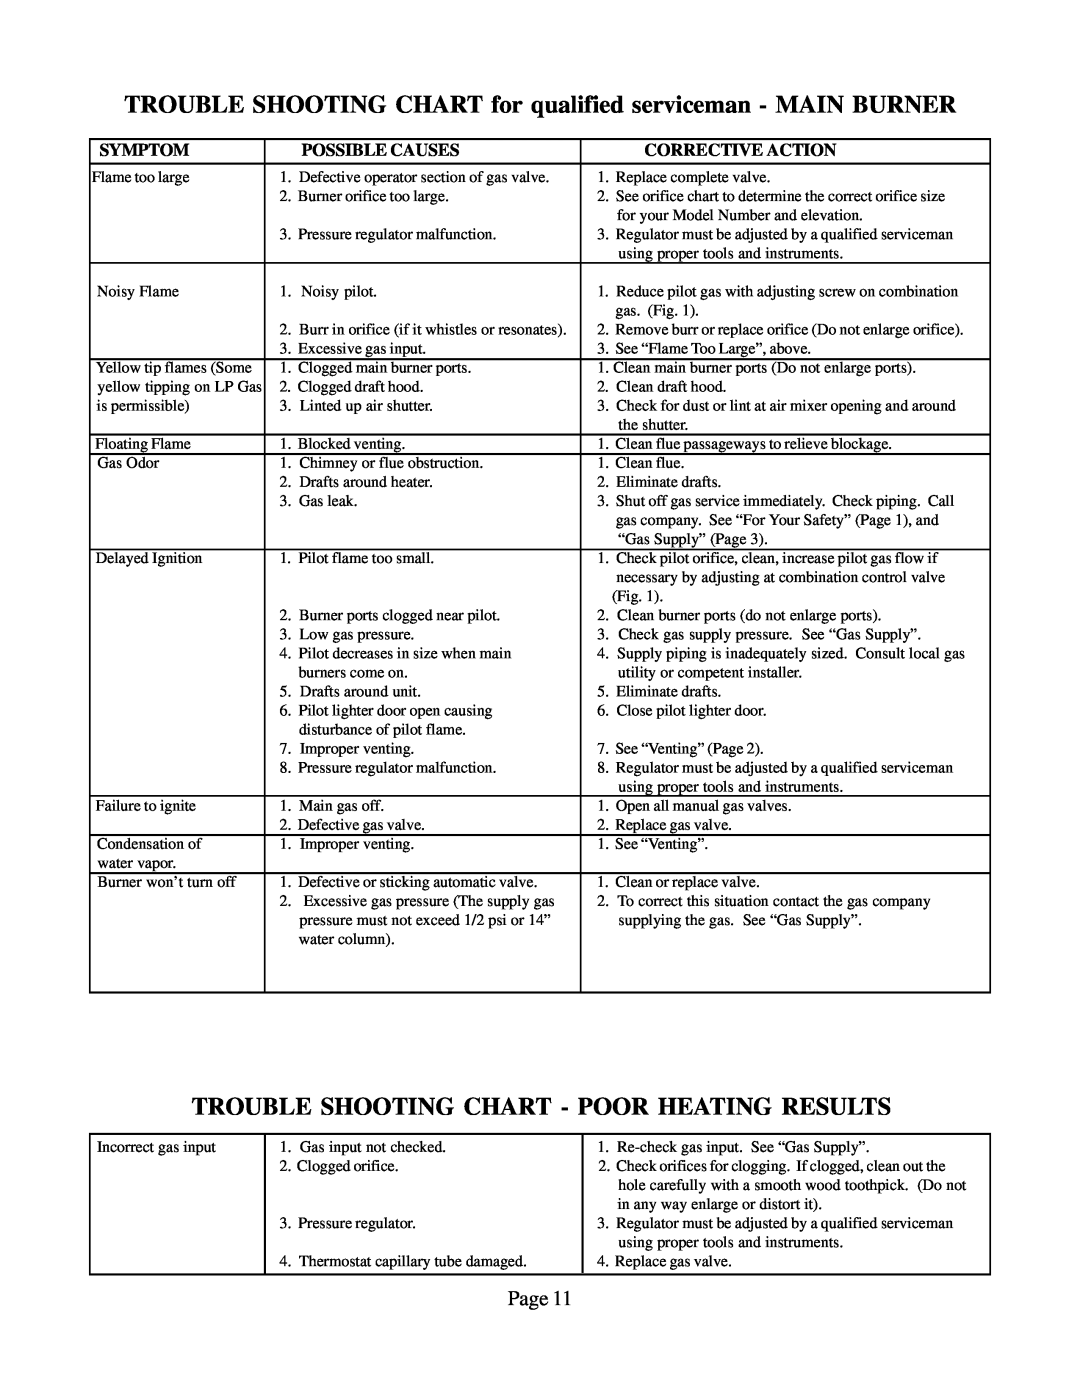 Louisville Tin and Stove VC351A-H, VCR702A-H Trouble Shooting Chart - Poor Heating Results, Symptom, Possible Causes 